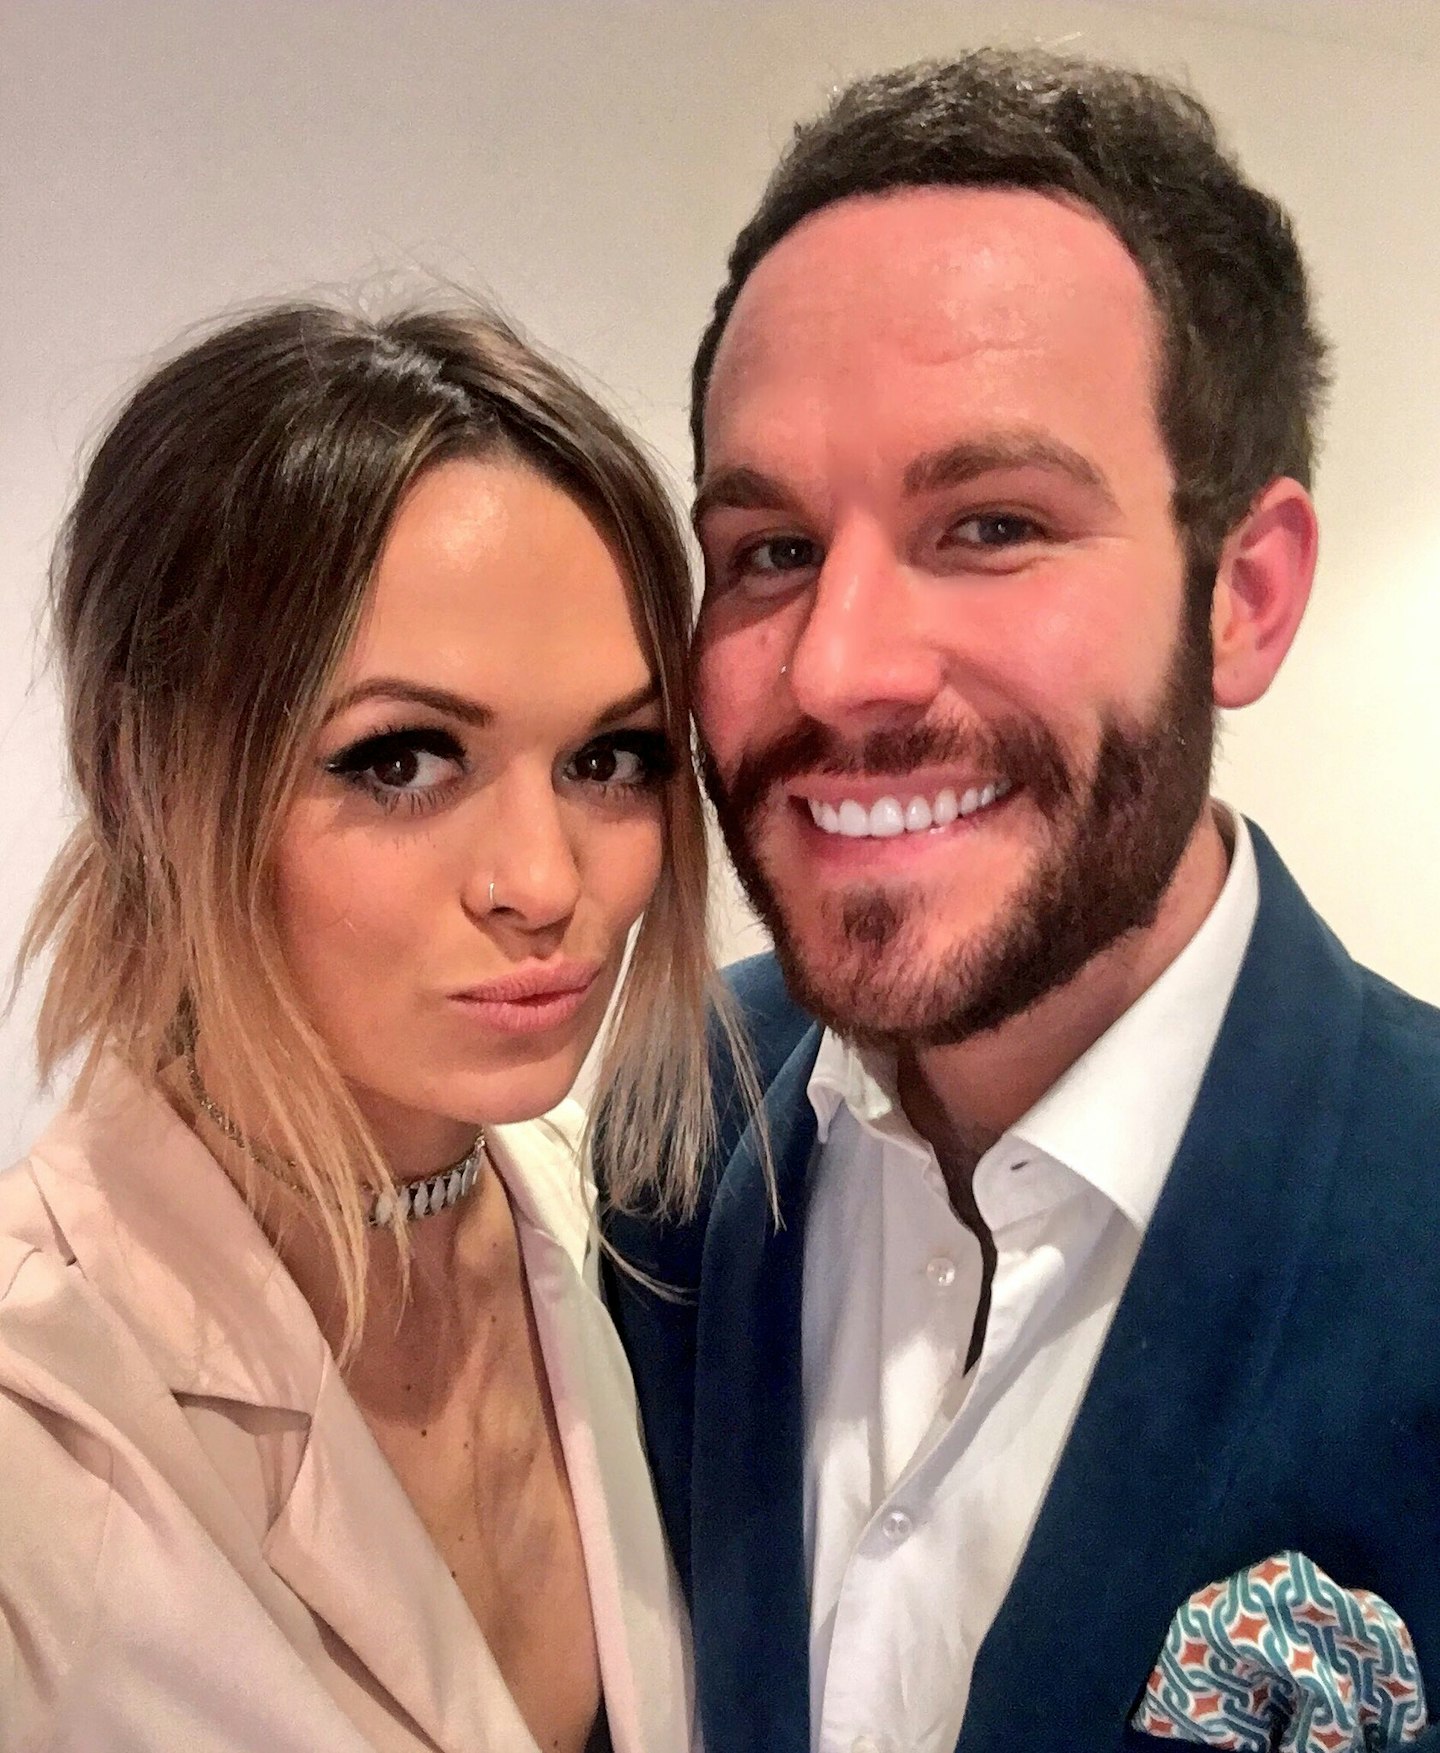 beckie-finch-adam-ryan-takemeout-getting-married-itv